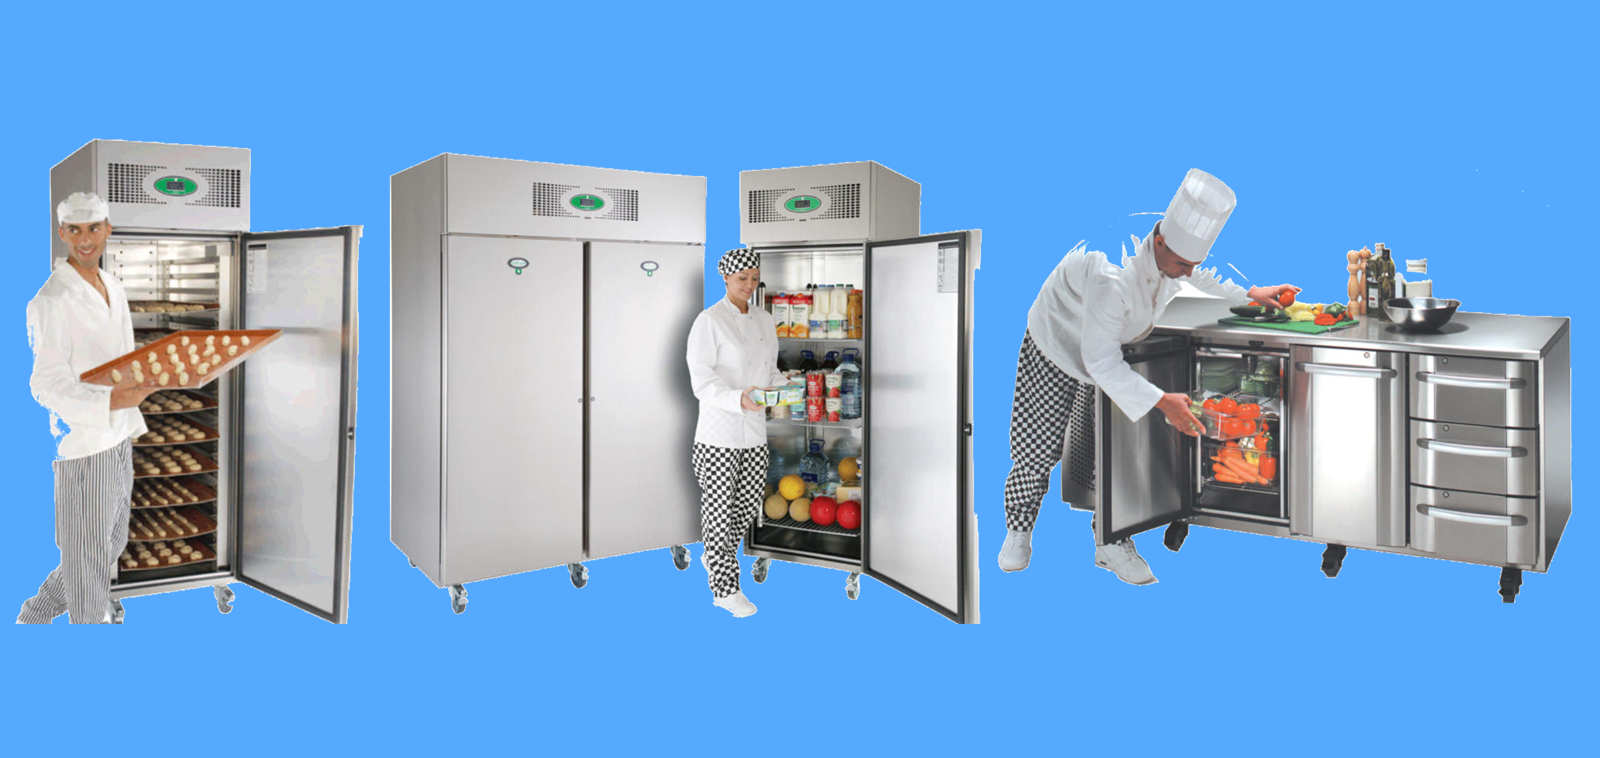 Bakery freezers and refrigeration